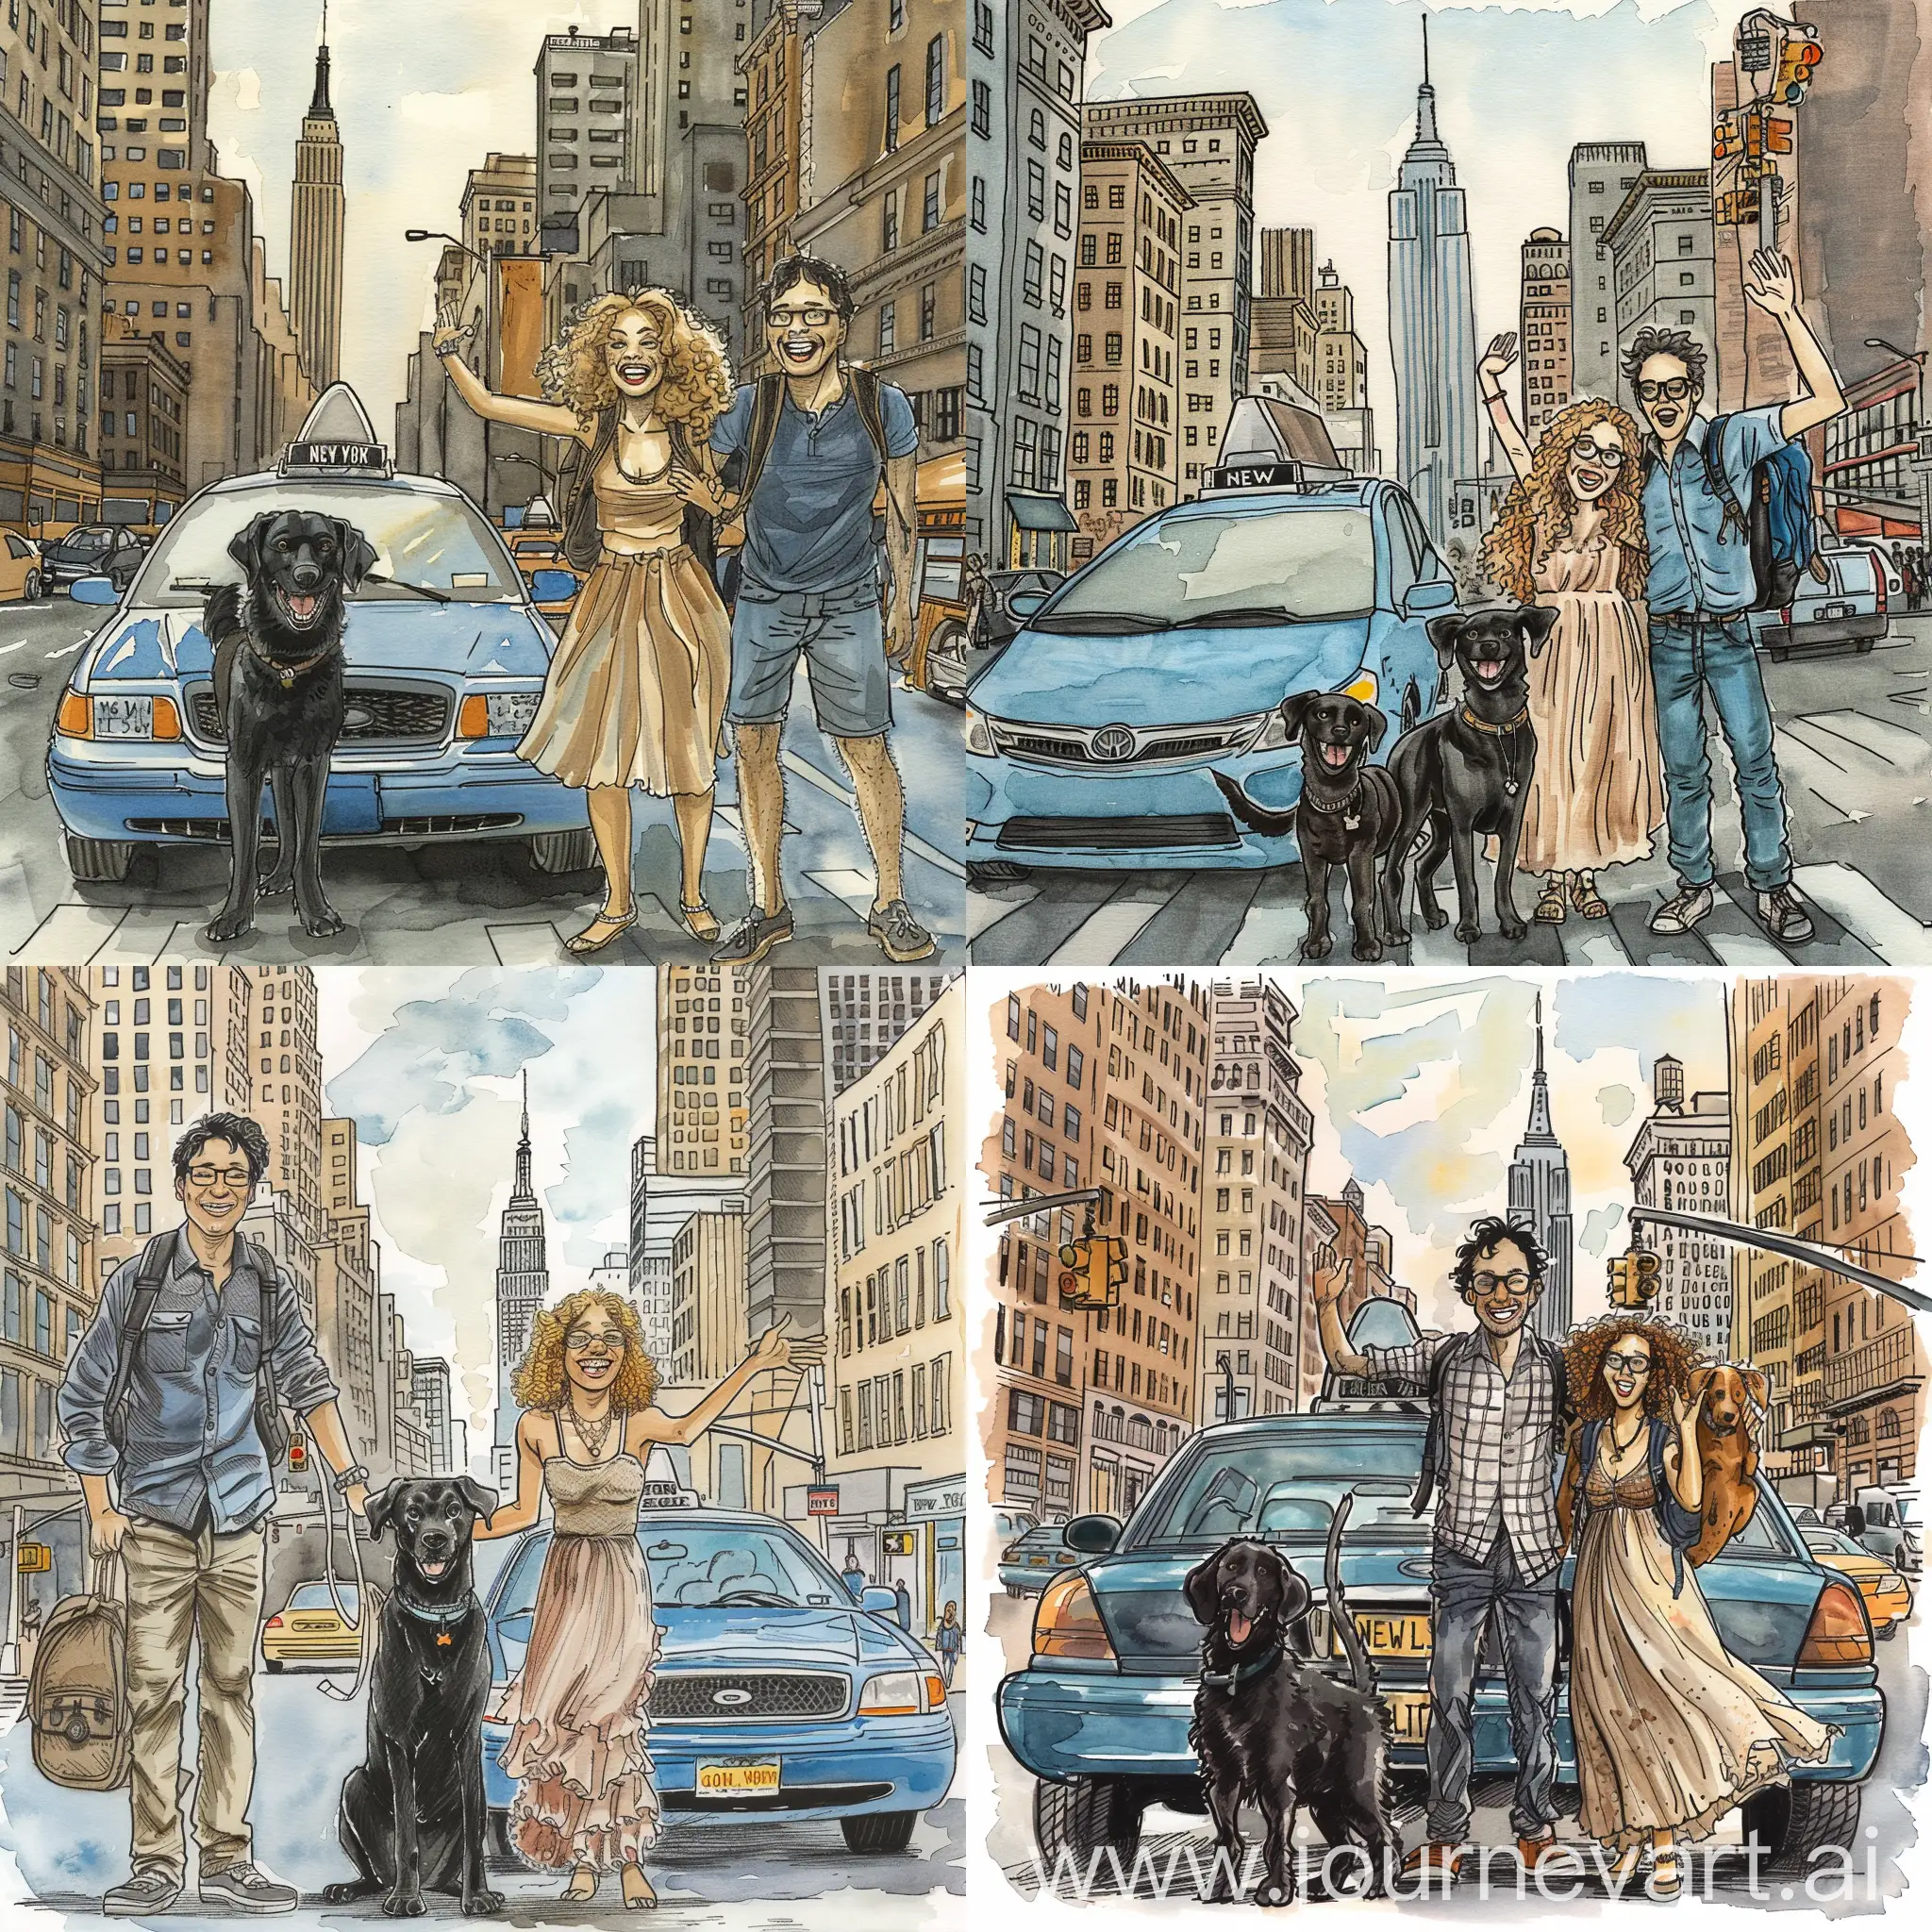 There is a young couple excited and  in love. they are standing on a busy city street next to a THEIR blue WV bus. with 2 medium sized adult Labradors. waving goodbye. GOOD BYE NEW YORK.   one dog is black lab mix chubby and longer longer collie hair. Second dog is more "dark chocolate brown lab" mix.  both dogs wear collars, remove leash! MAKE dogs free. MAKE THE SECOND DOG DARK BROWN NOW!  The man is handsome tall thin with ALL BLACK not brown hair and light beard and glasses. backpacks on. GIVE HIM BLACK HAIR!!!!  The women jewelry, has extremely longer curly blonde hair down to her waist, add some weight she's fat with glasses. the car has bags loaded on top, road trip.   background is new york city. tall buildings. skyscraper. ready for adventure. empire state building.  traffic.   watercolor. children's book. soft. artsy.  There is a couple excited and  in love. They are standing on a busy new york city street. in front of blue car.   one dog is black lab mix and longer collie hair. Second dog is darker chocolate brown spaniel lab mix. dogs are chocolate lab and black lab.   Remove dog leashes. take the leash off the dog now.   The man has black hair and light beard and glasses.  tall and thin. skinner but athletic. his shirt is solid not stripped. tall and handsome.  The woman has extremely longer curly blonde hair. make her hair down to her waist. hair longer. much longer. even longer hair.   Women beautiful. she's wearing a long flowing pretty  dress , and jewelry.    The background is showing new york city. Tall buildings. skyscraper. traffic lights.   the style is watercolor. children's book. soft. artsy.